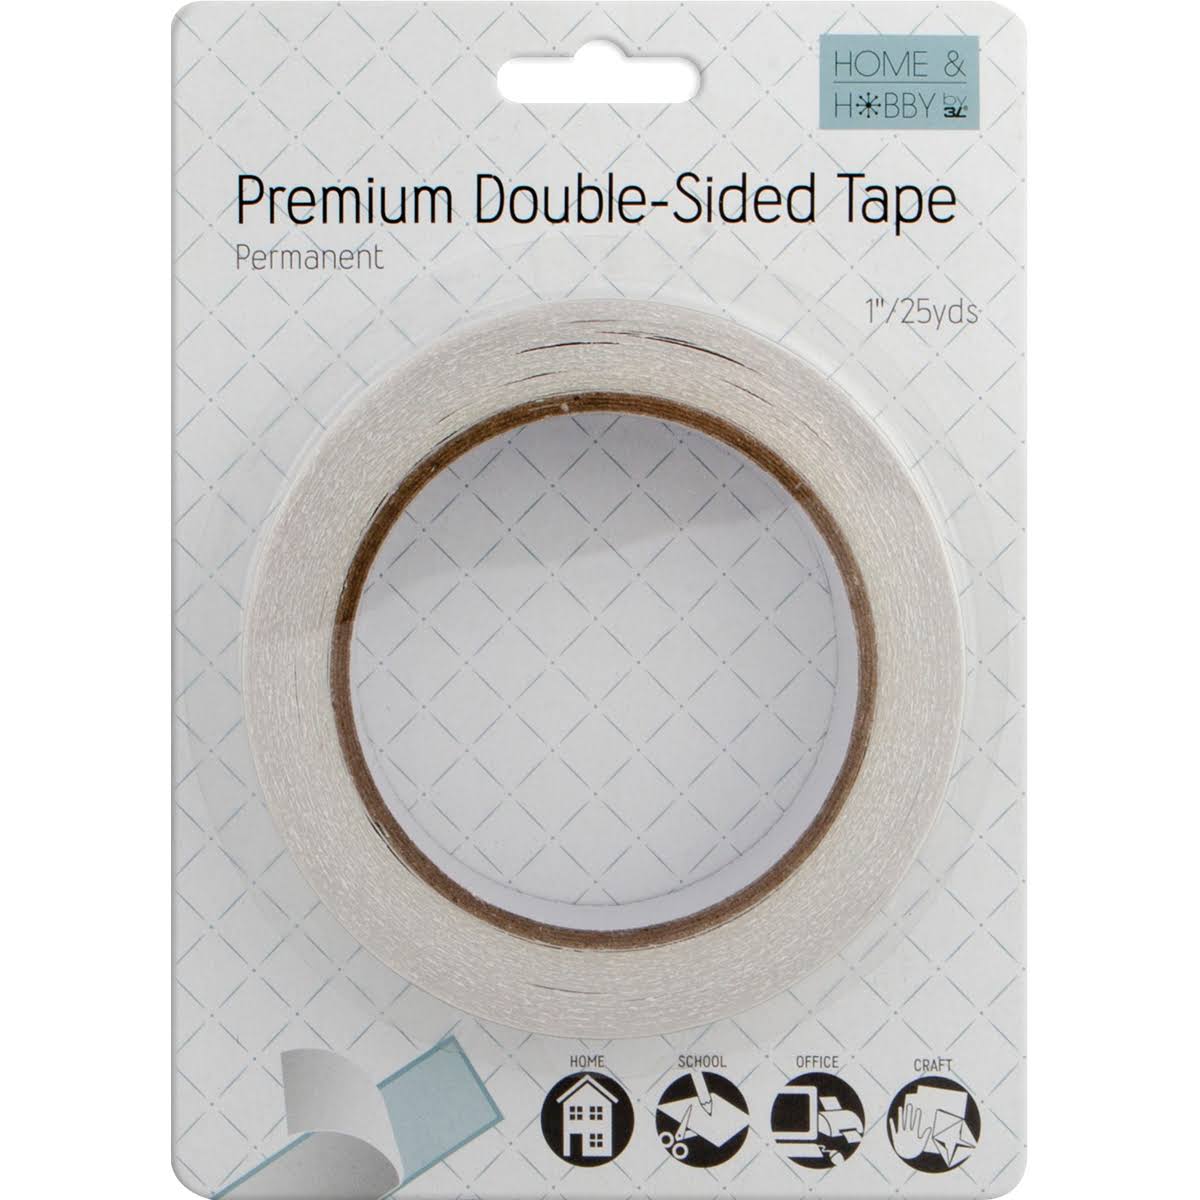 HomeHobby by 3L Premium Double-sided Tape, White, 1 -inch